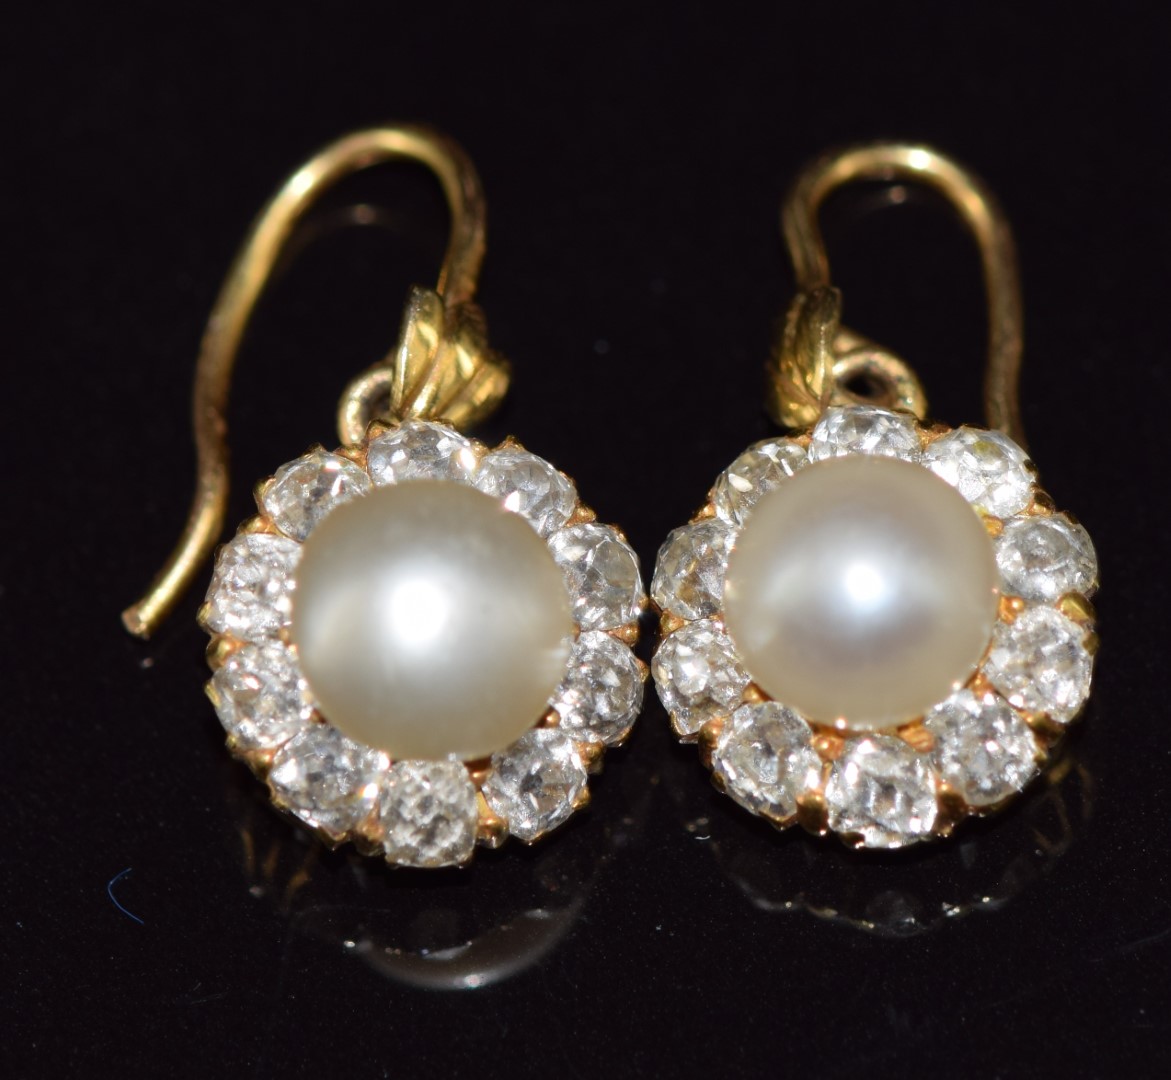 A pair of c1900 18ct gold earrings, each set with a natural pearl measuring 6.4mm surrounded by